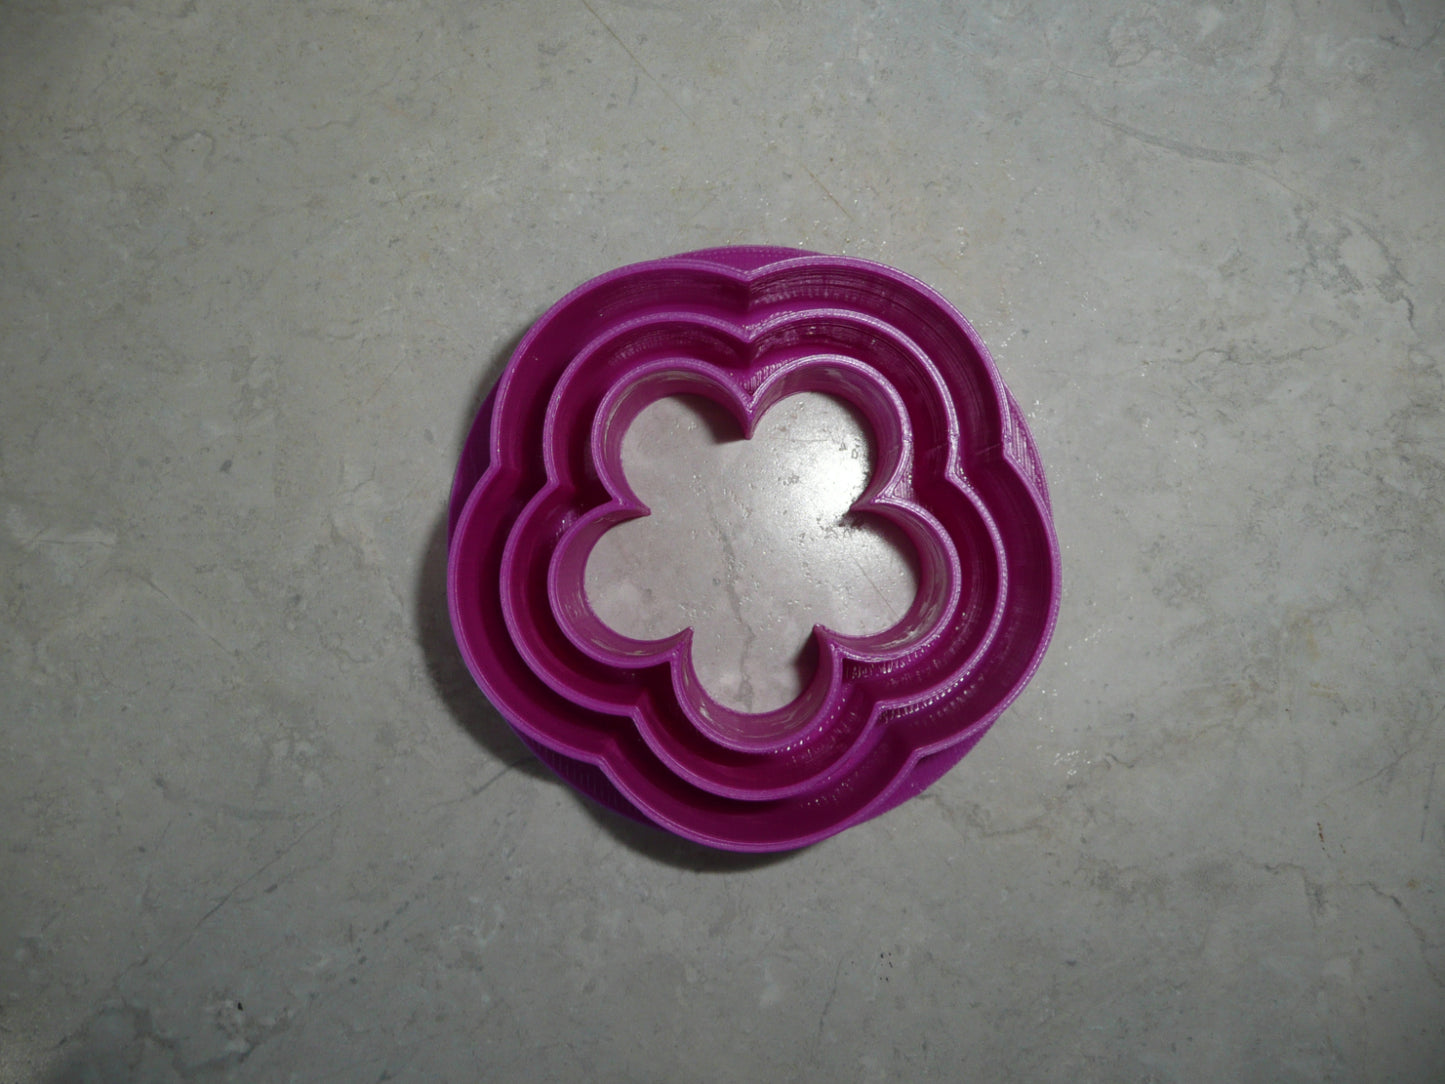 Flower Mini Concha Cutter Mexican Sweet Bread Stamp Made in USA PR4981